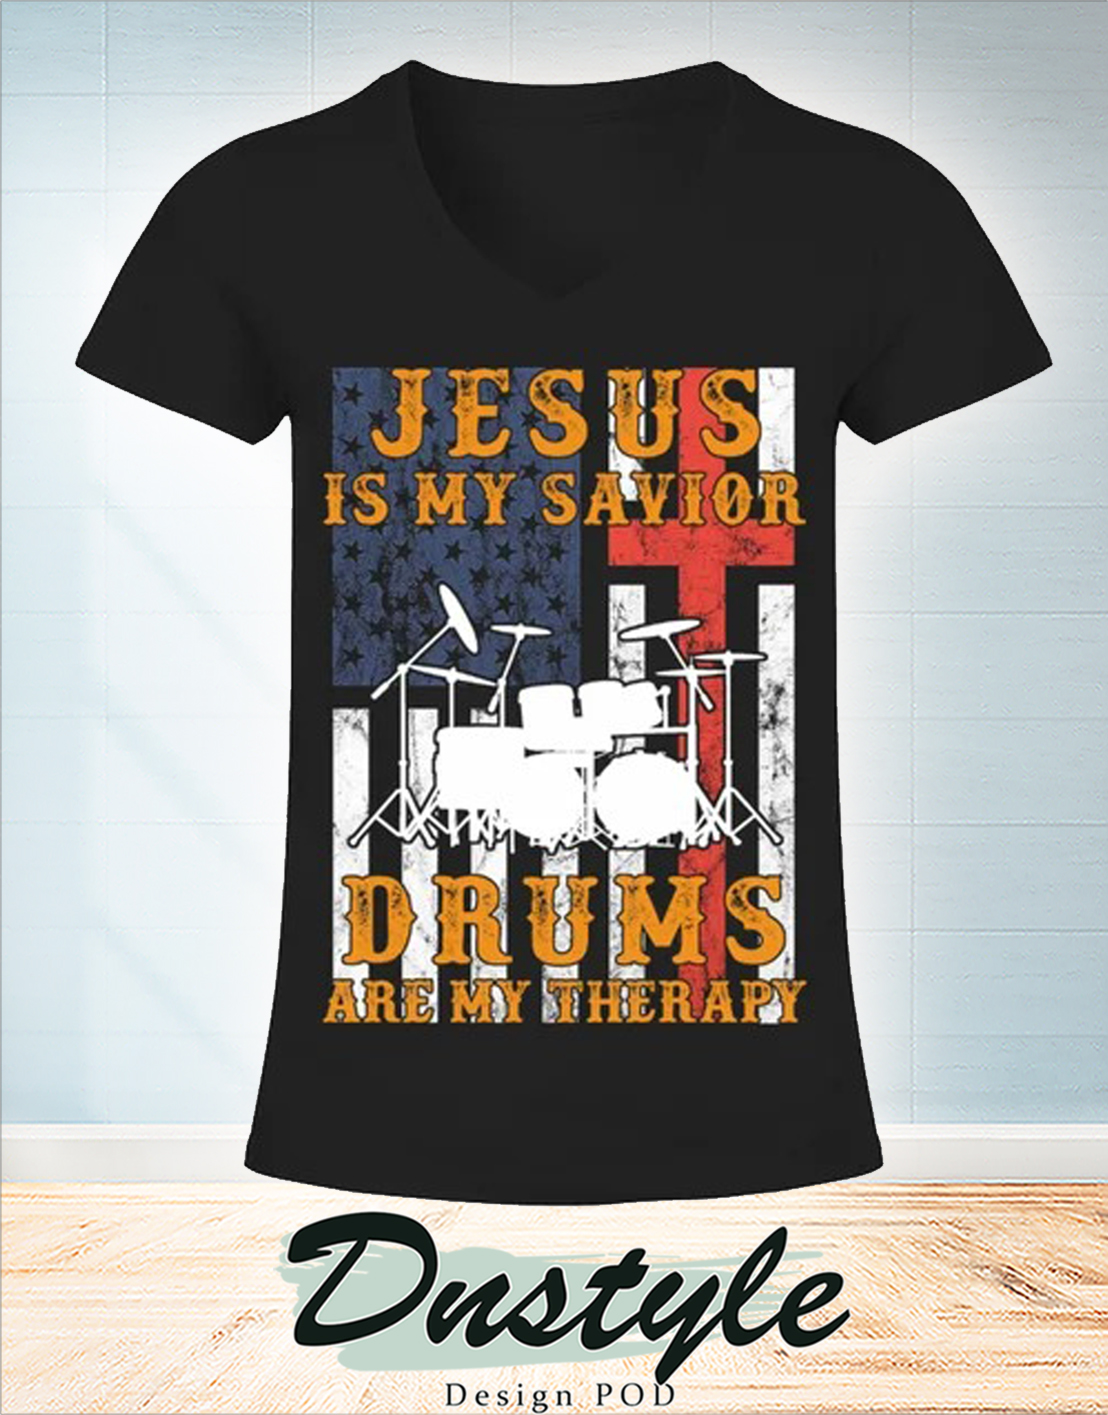 Jesus is my savior drums are my therapy v-neck